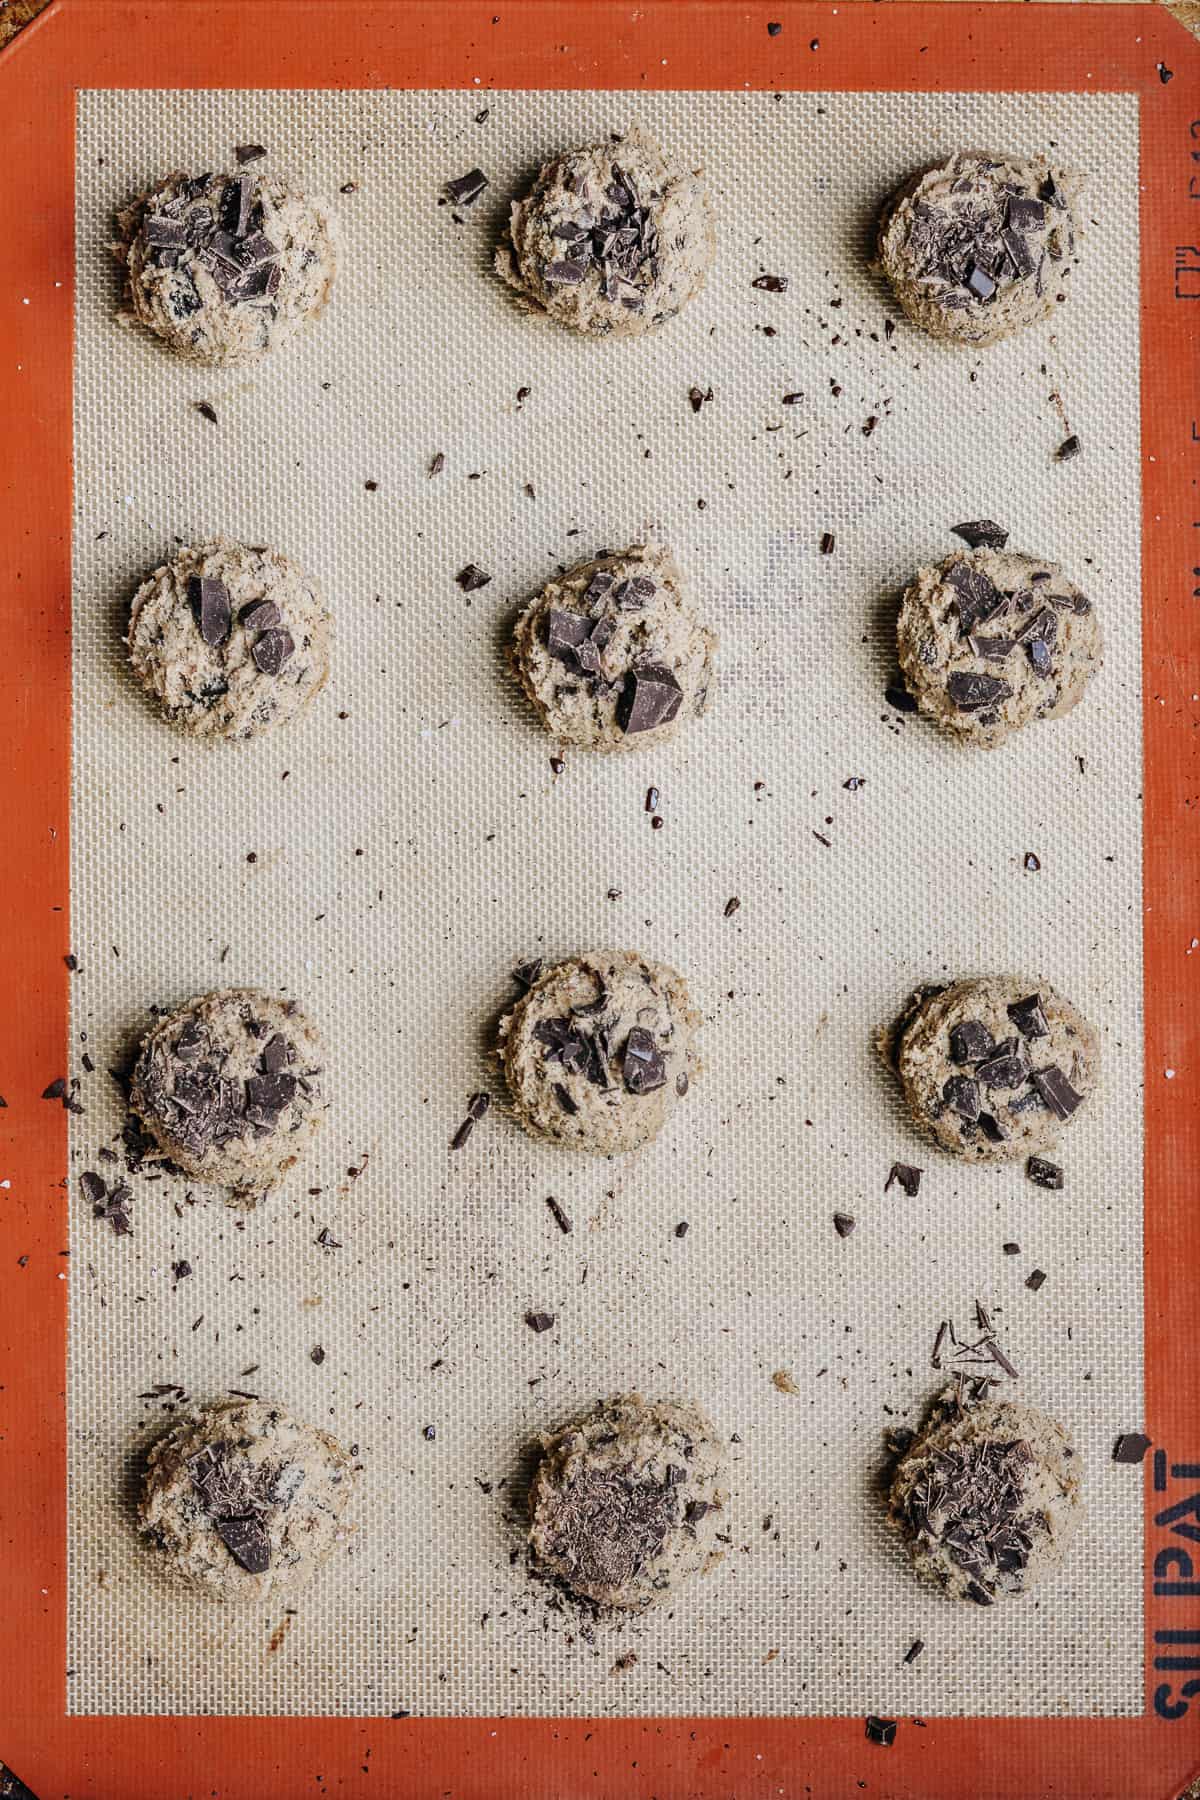 Scooped cookie dough on silpat mat on a baking sheet.